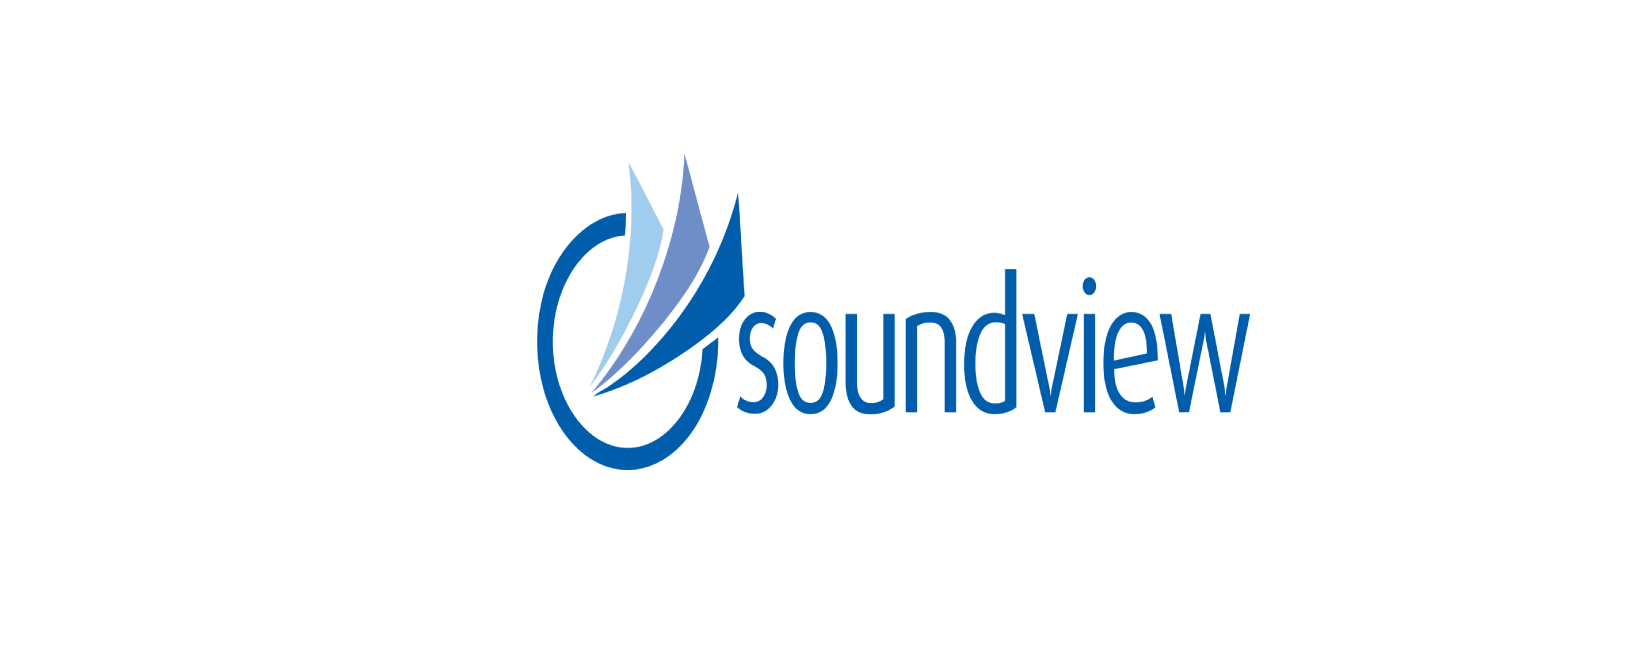 Soundview Discount Code 2022